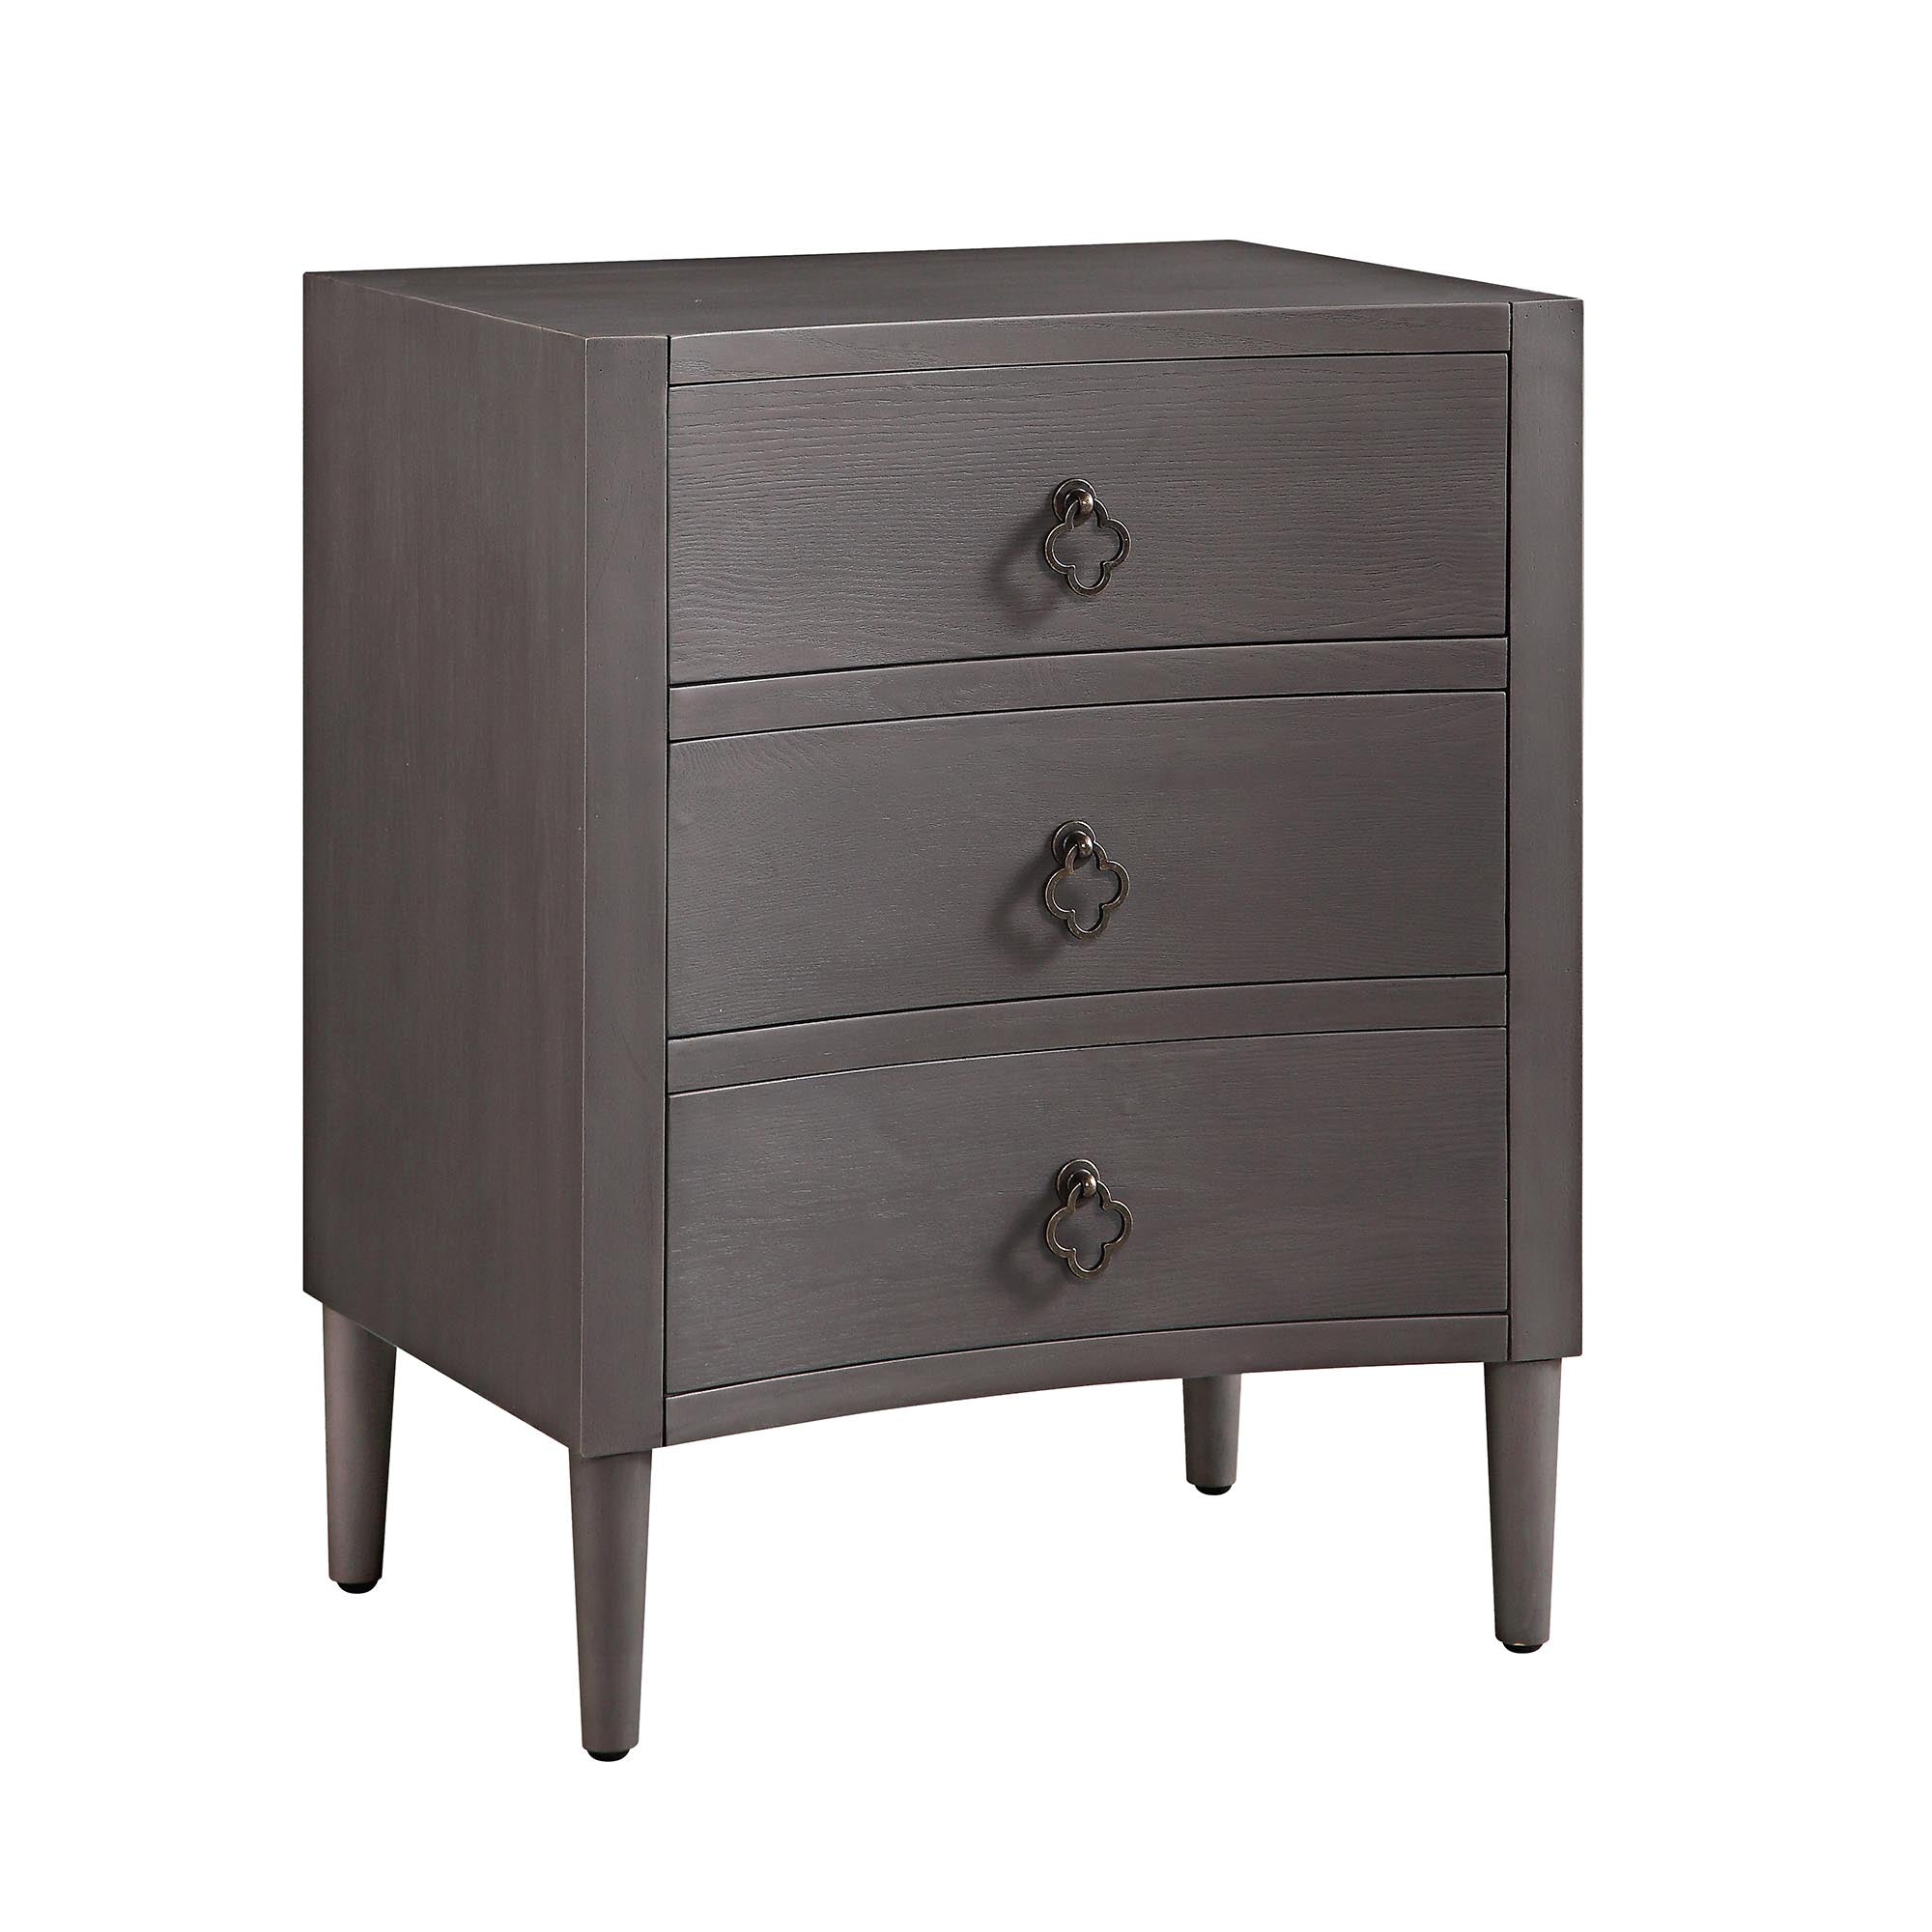 Thalia Concave 3 Drawer Bedside Table, Silver Oak